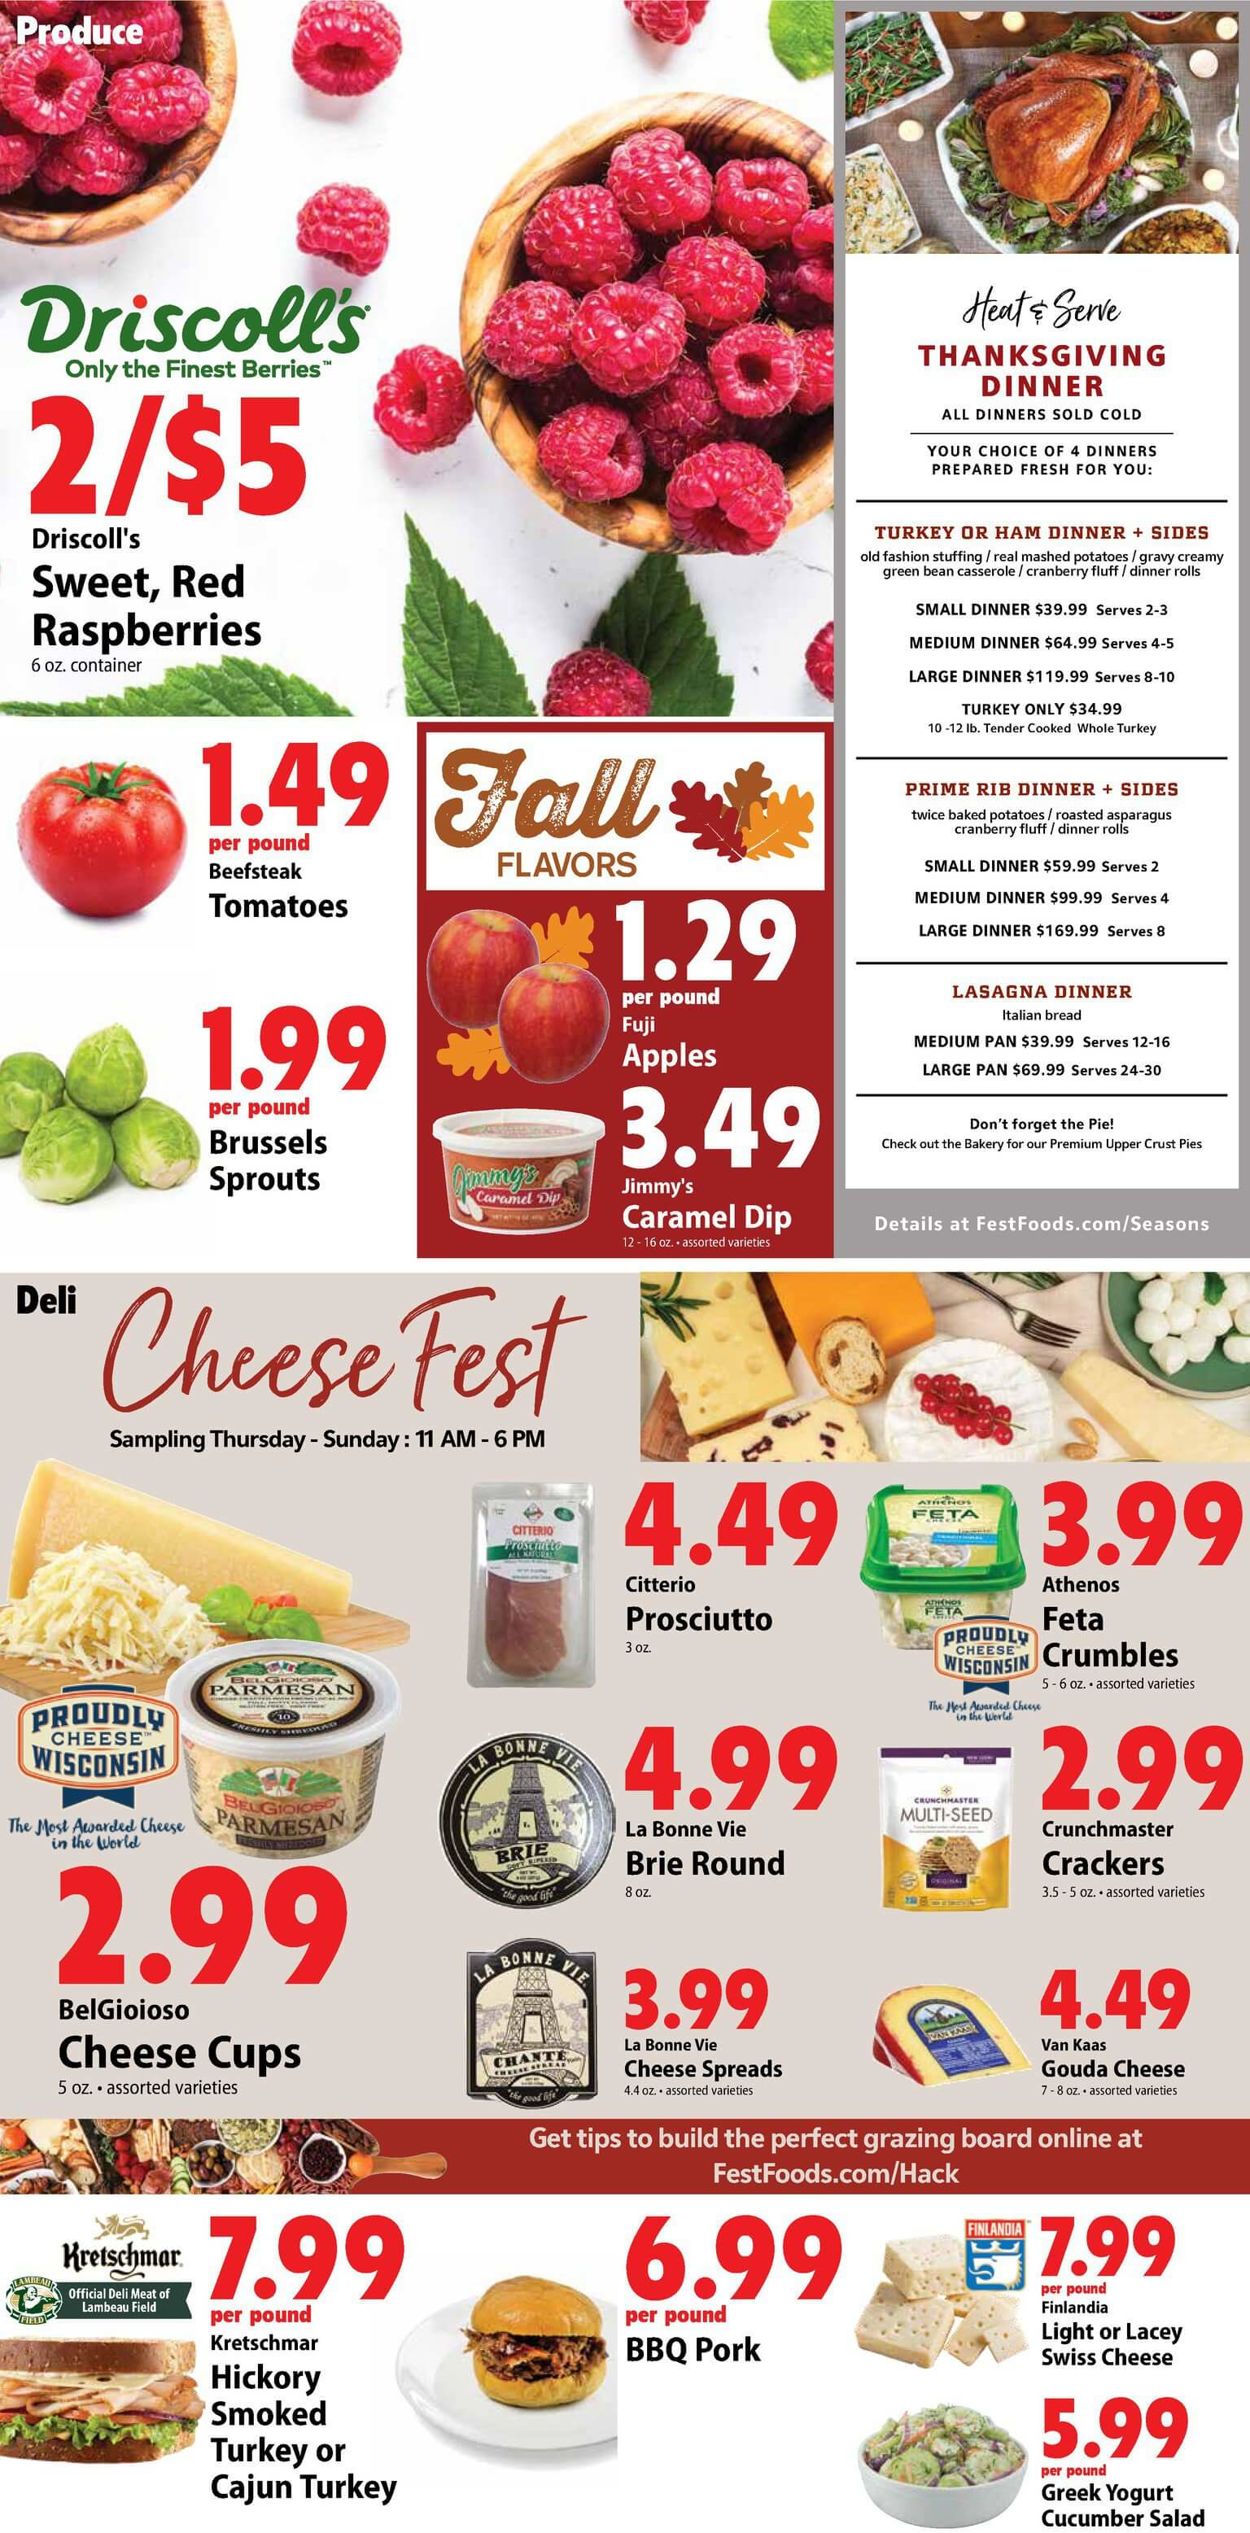 Festival Foods Current weekly ad 11/06 11/12/2019 [3]